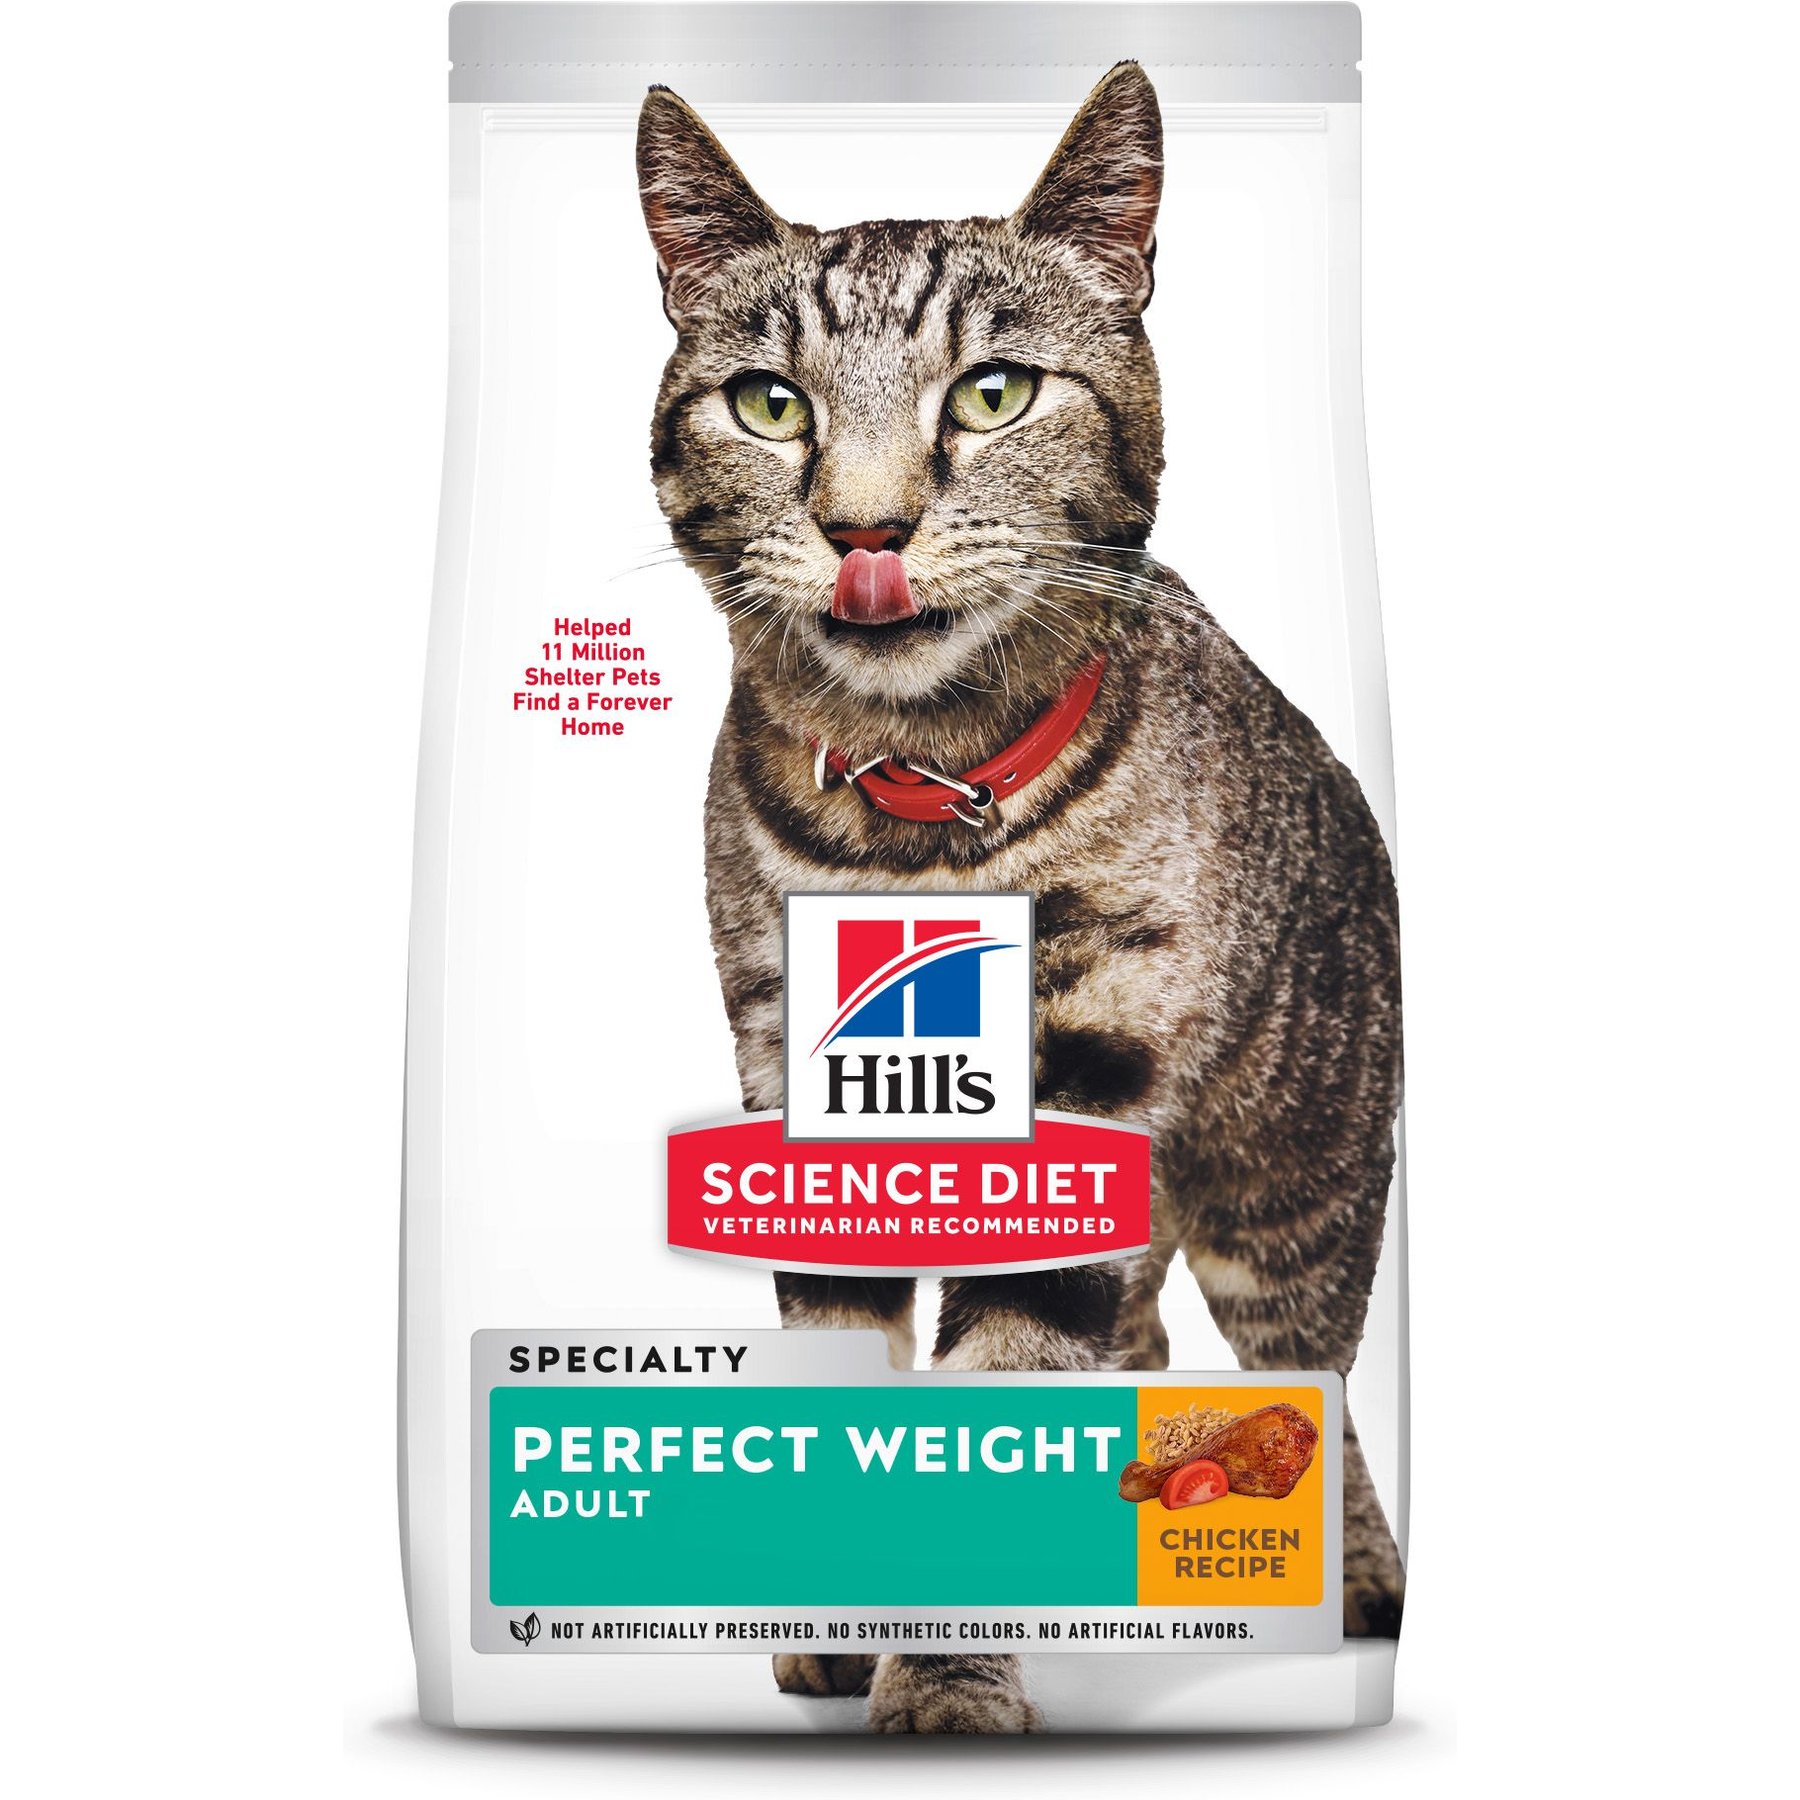 Why Does My Cat Yowl at Night? ׀ Hill's Pet